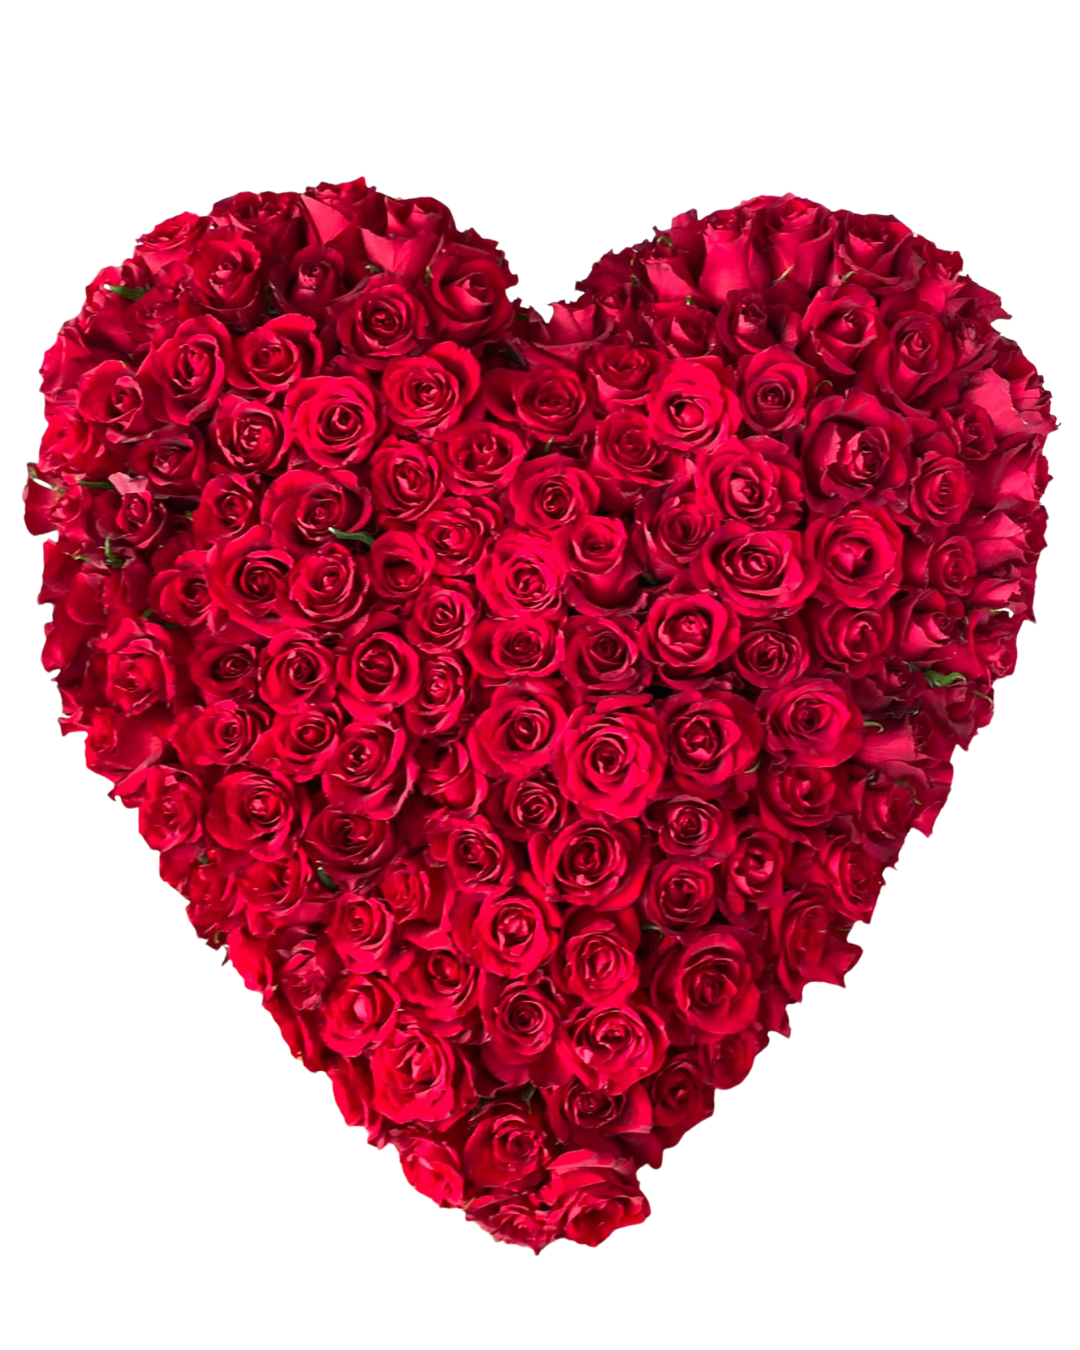 Heart of 100 Red Roses "Love"